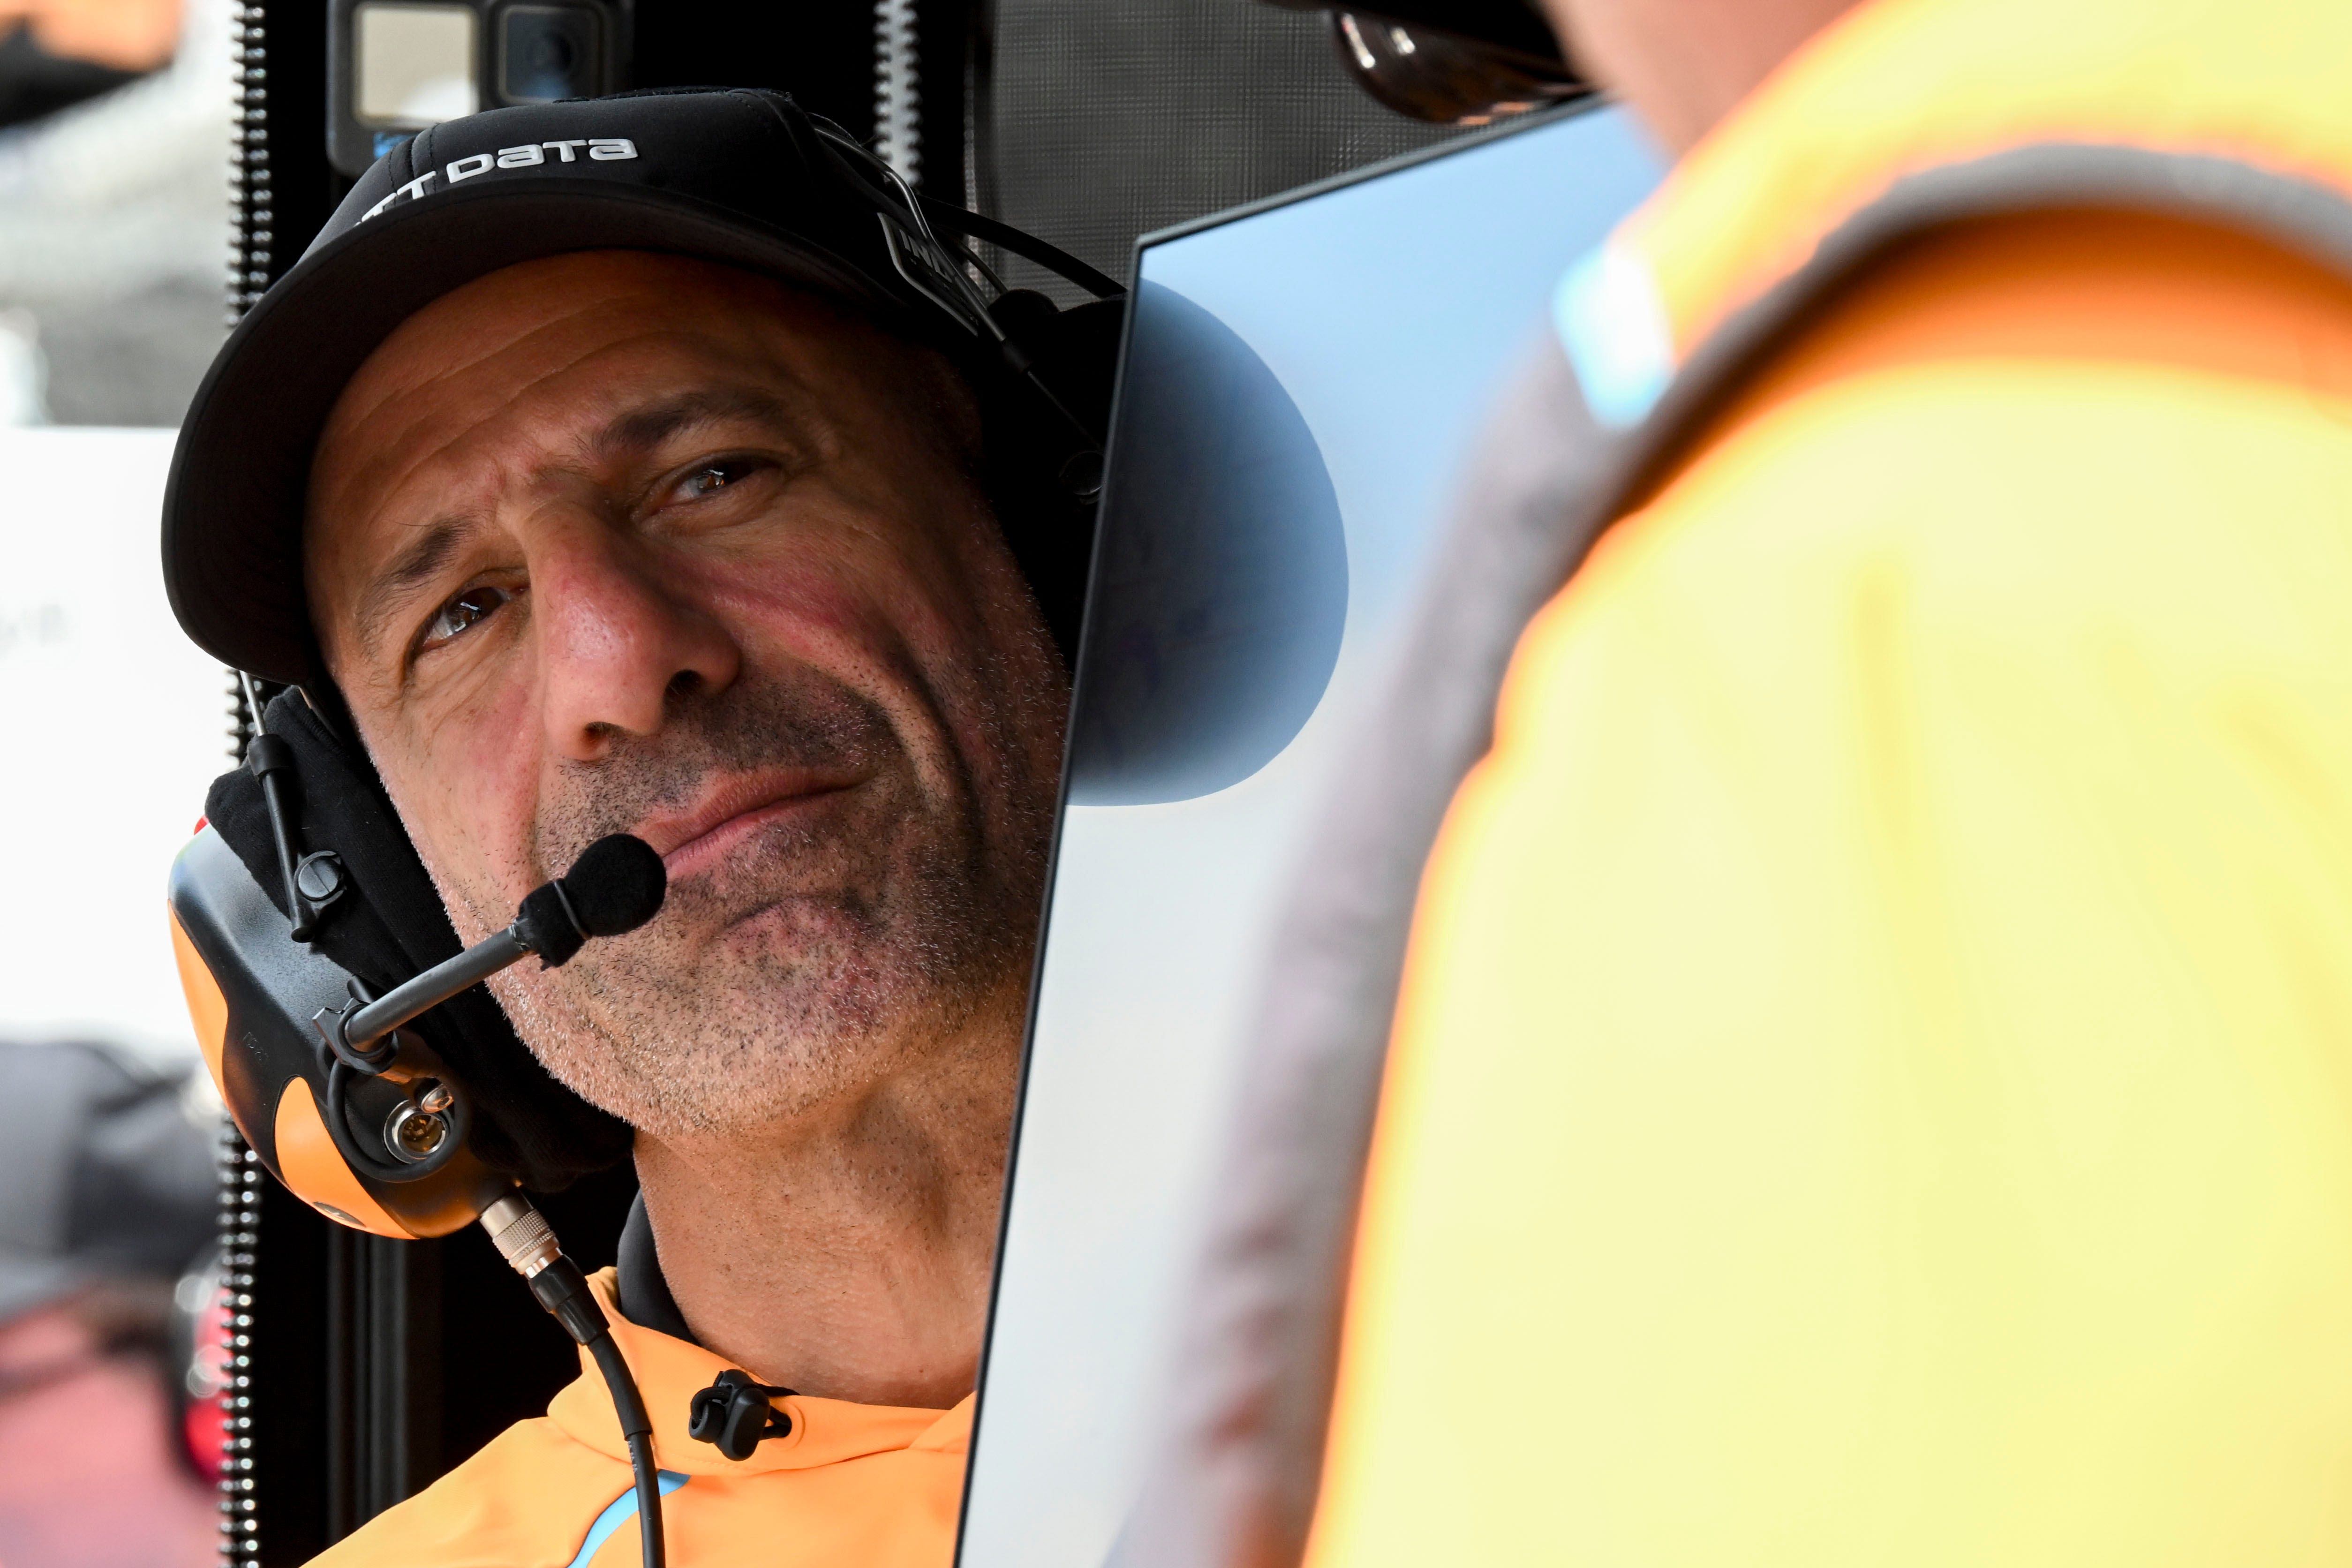 ‘It’s going to hurt until you win one’: Tony Kanaan on emotions for Arrow McLaren in 500 loss